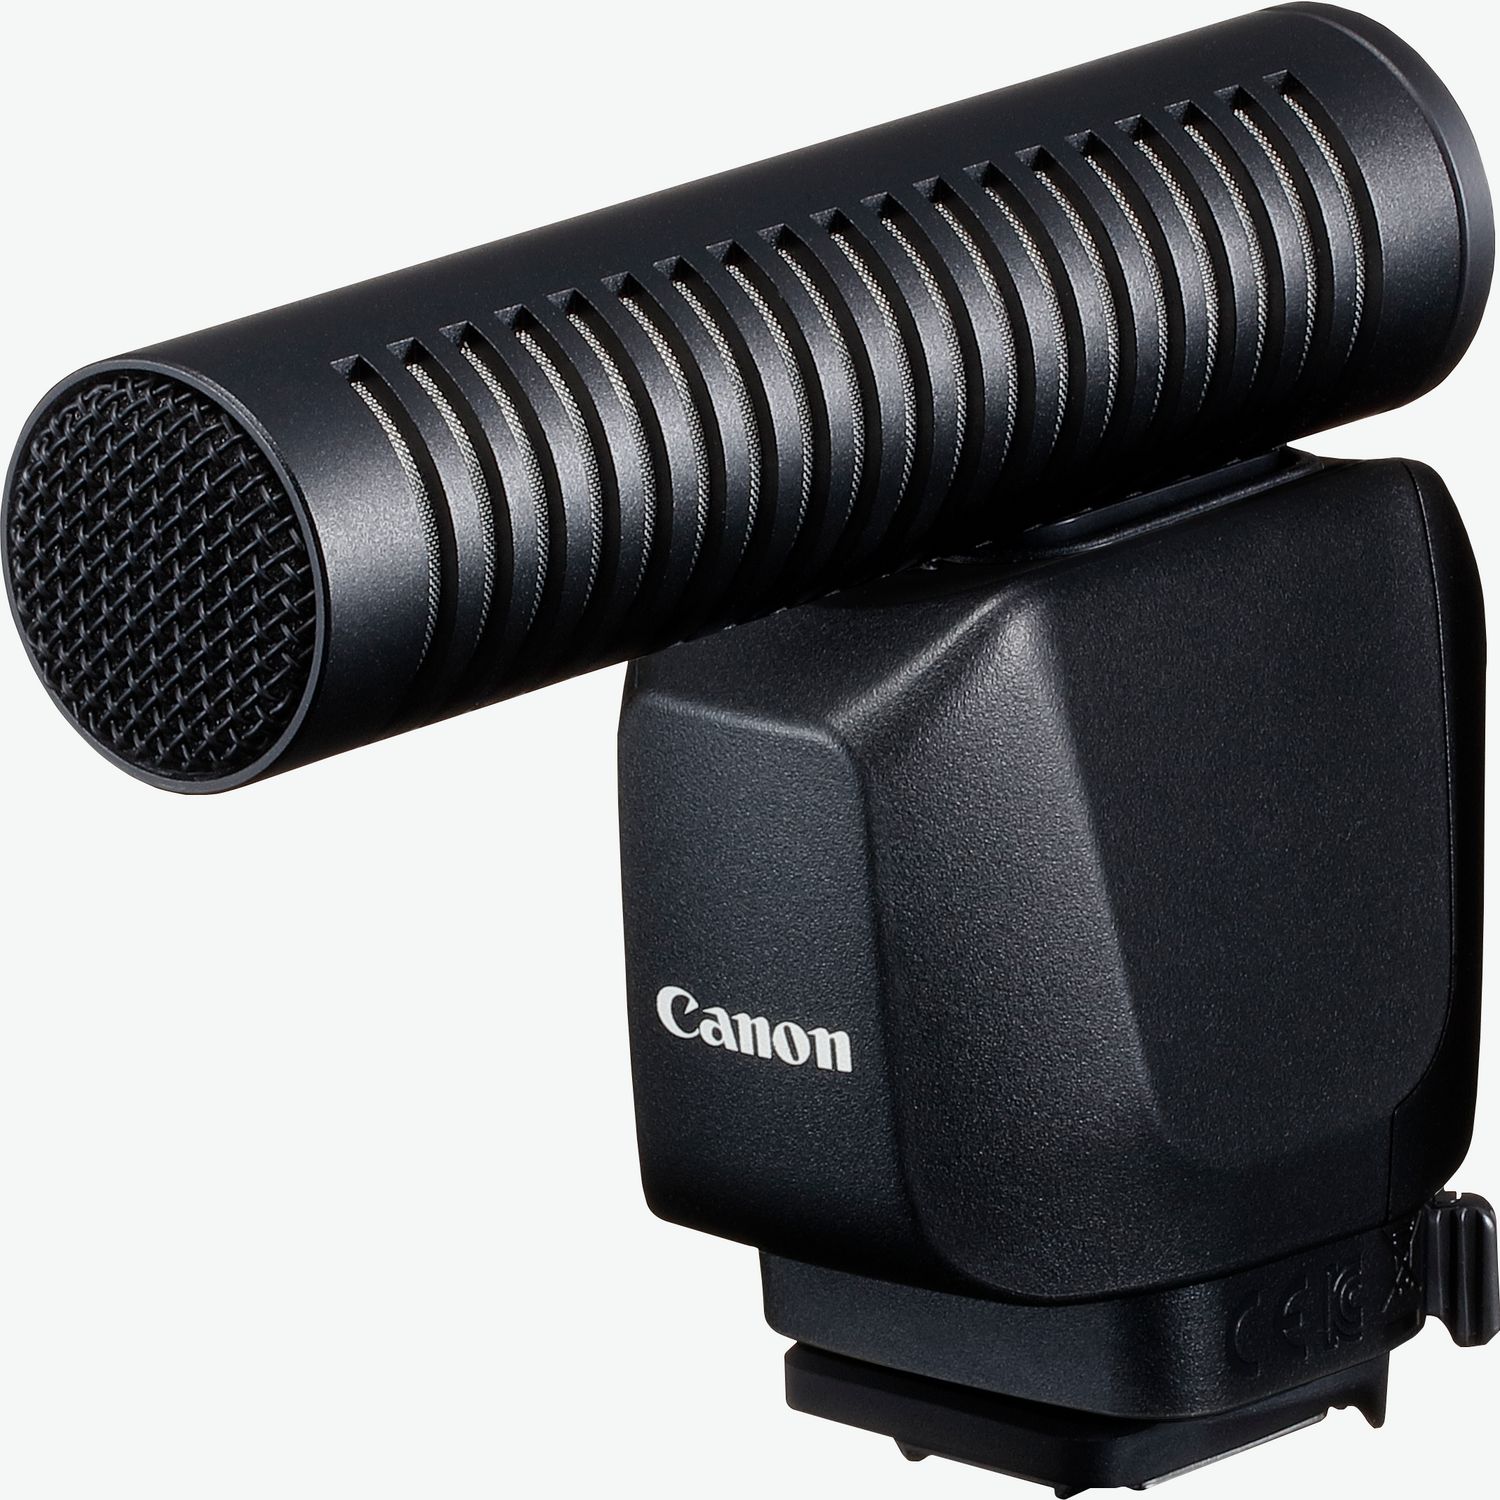 canon dm e1d directional stereo microphone 5138C001